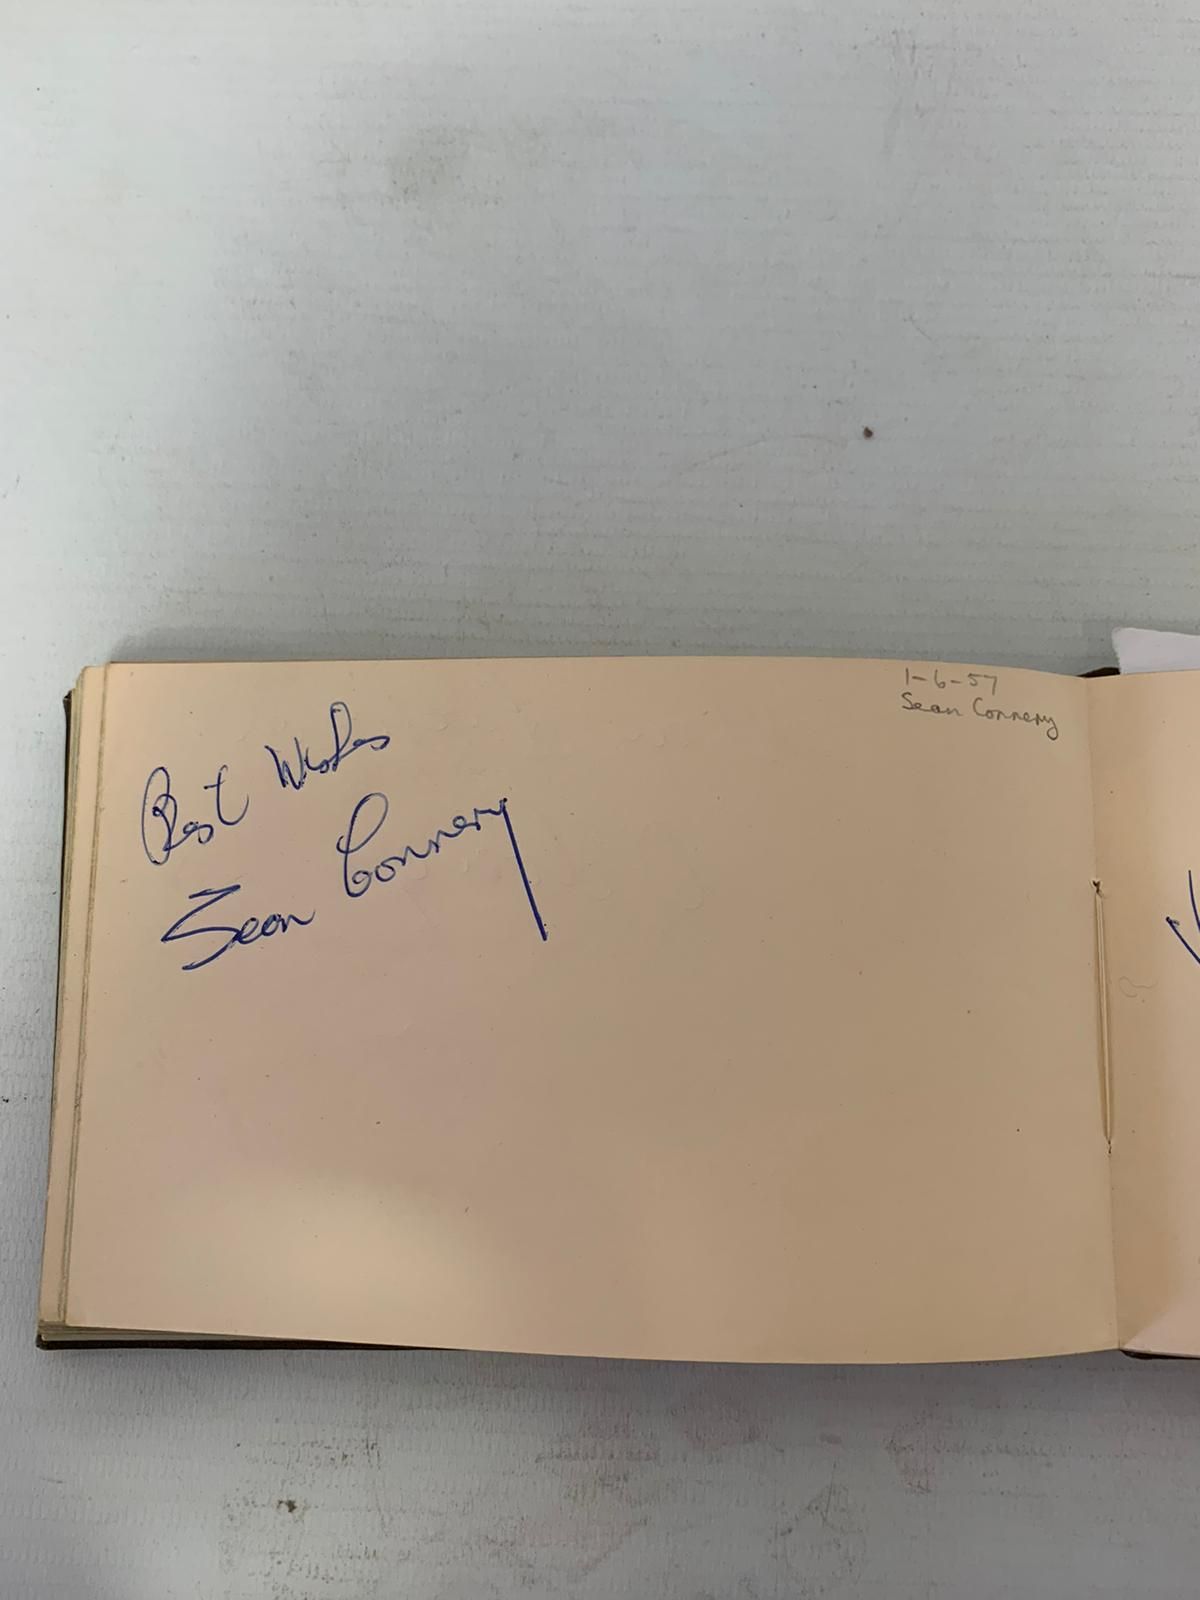 FILM & STAGE AUTOGRAPH ALBUM, a collection of signatures in an autograph album featuring some of the - Image 9 of 9